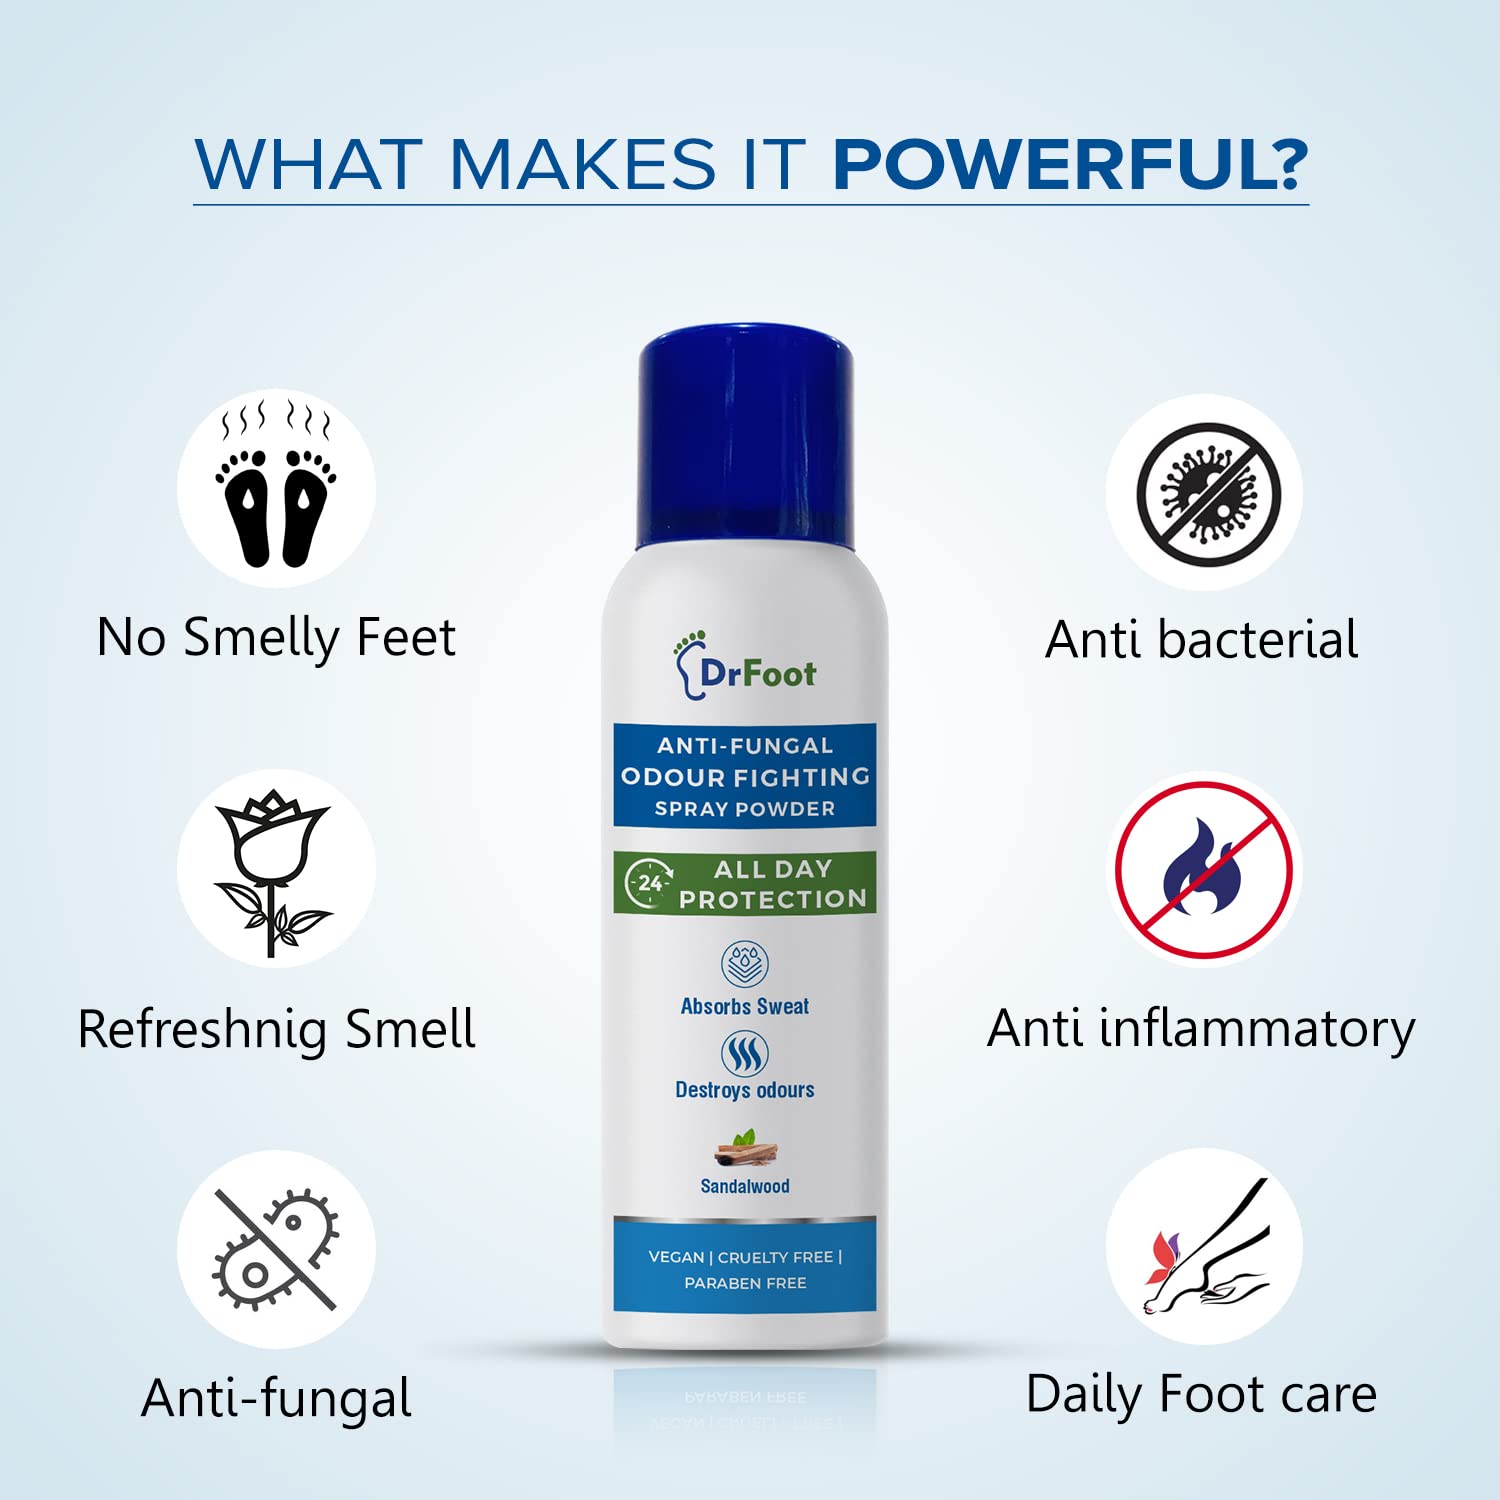 Dr Foot Anti-Fungal Odour Fighting Spray Powder with Neem Powder, Menthol Oil & Sandalwood | Ultimate Odour Neutralizer| Removes Bad Smell & Keep your foot Fresh and Dry – 130ml / 80gm (Pack of 2)